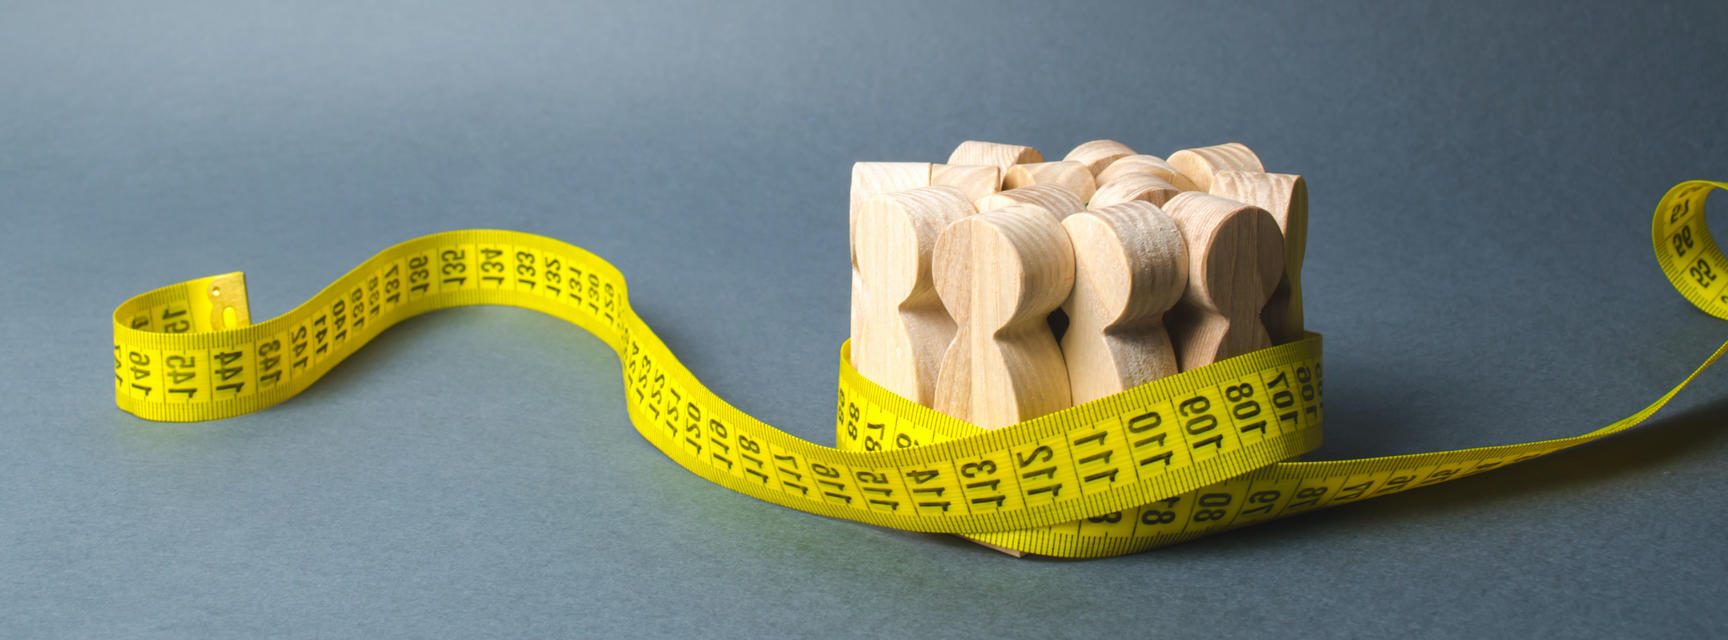 Group of wooden figures gripped by measuring tape